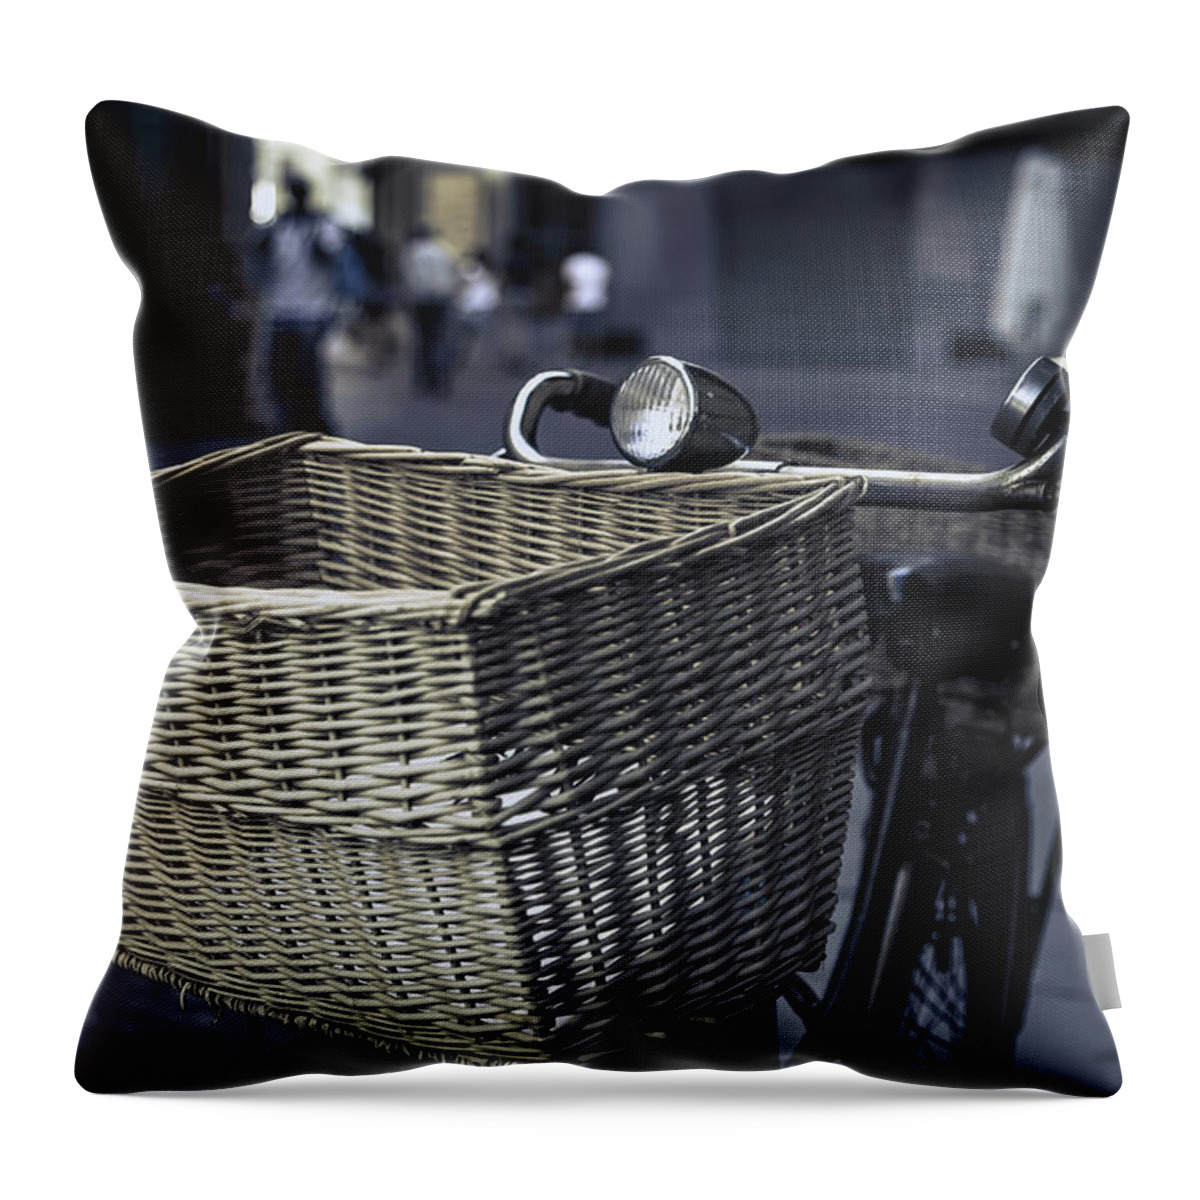 Outdoors Throw Pillow featuring the photograph Old Bicycle With Wicker Basket by Paolomartinezphotography